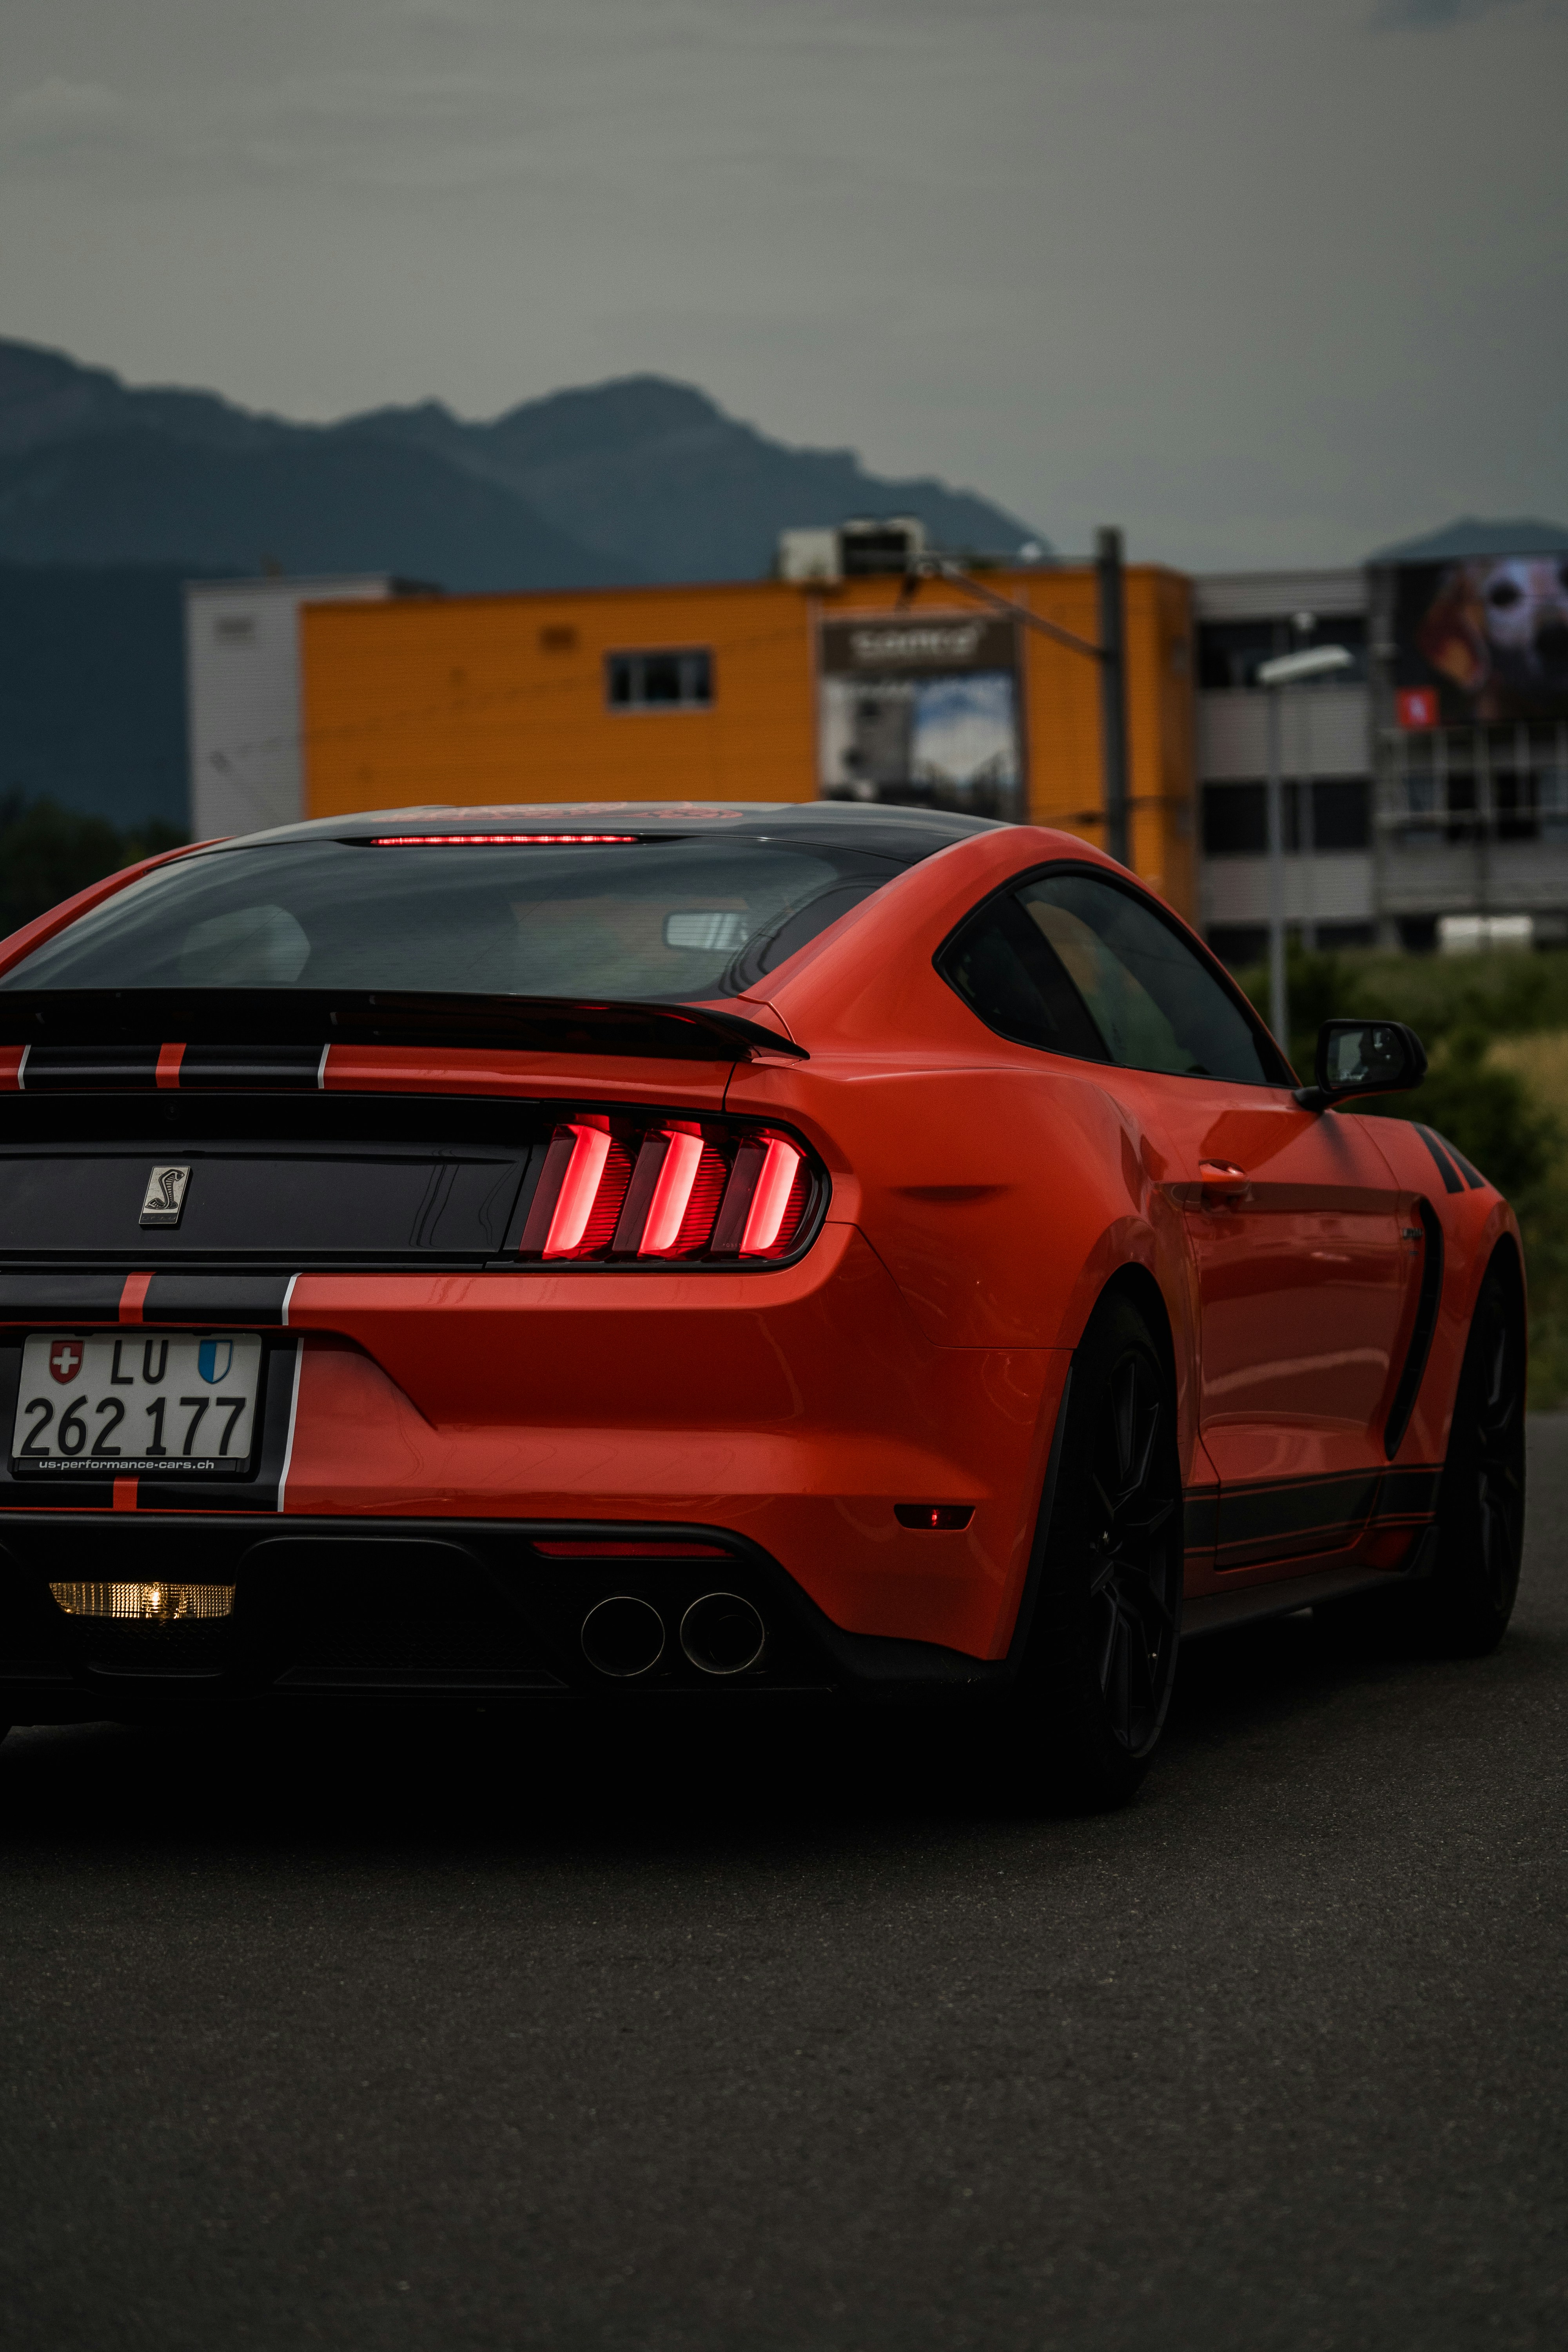 Choose from a curated selection of Ford Mustang wallpapers for your mobile and desktop screens. Always free on Unsplash.